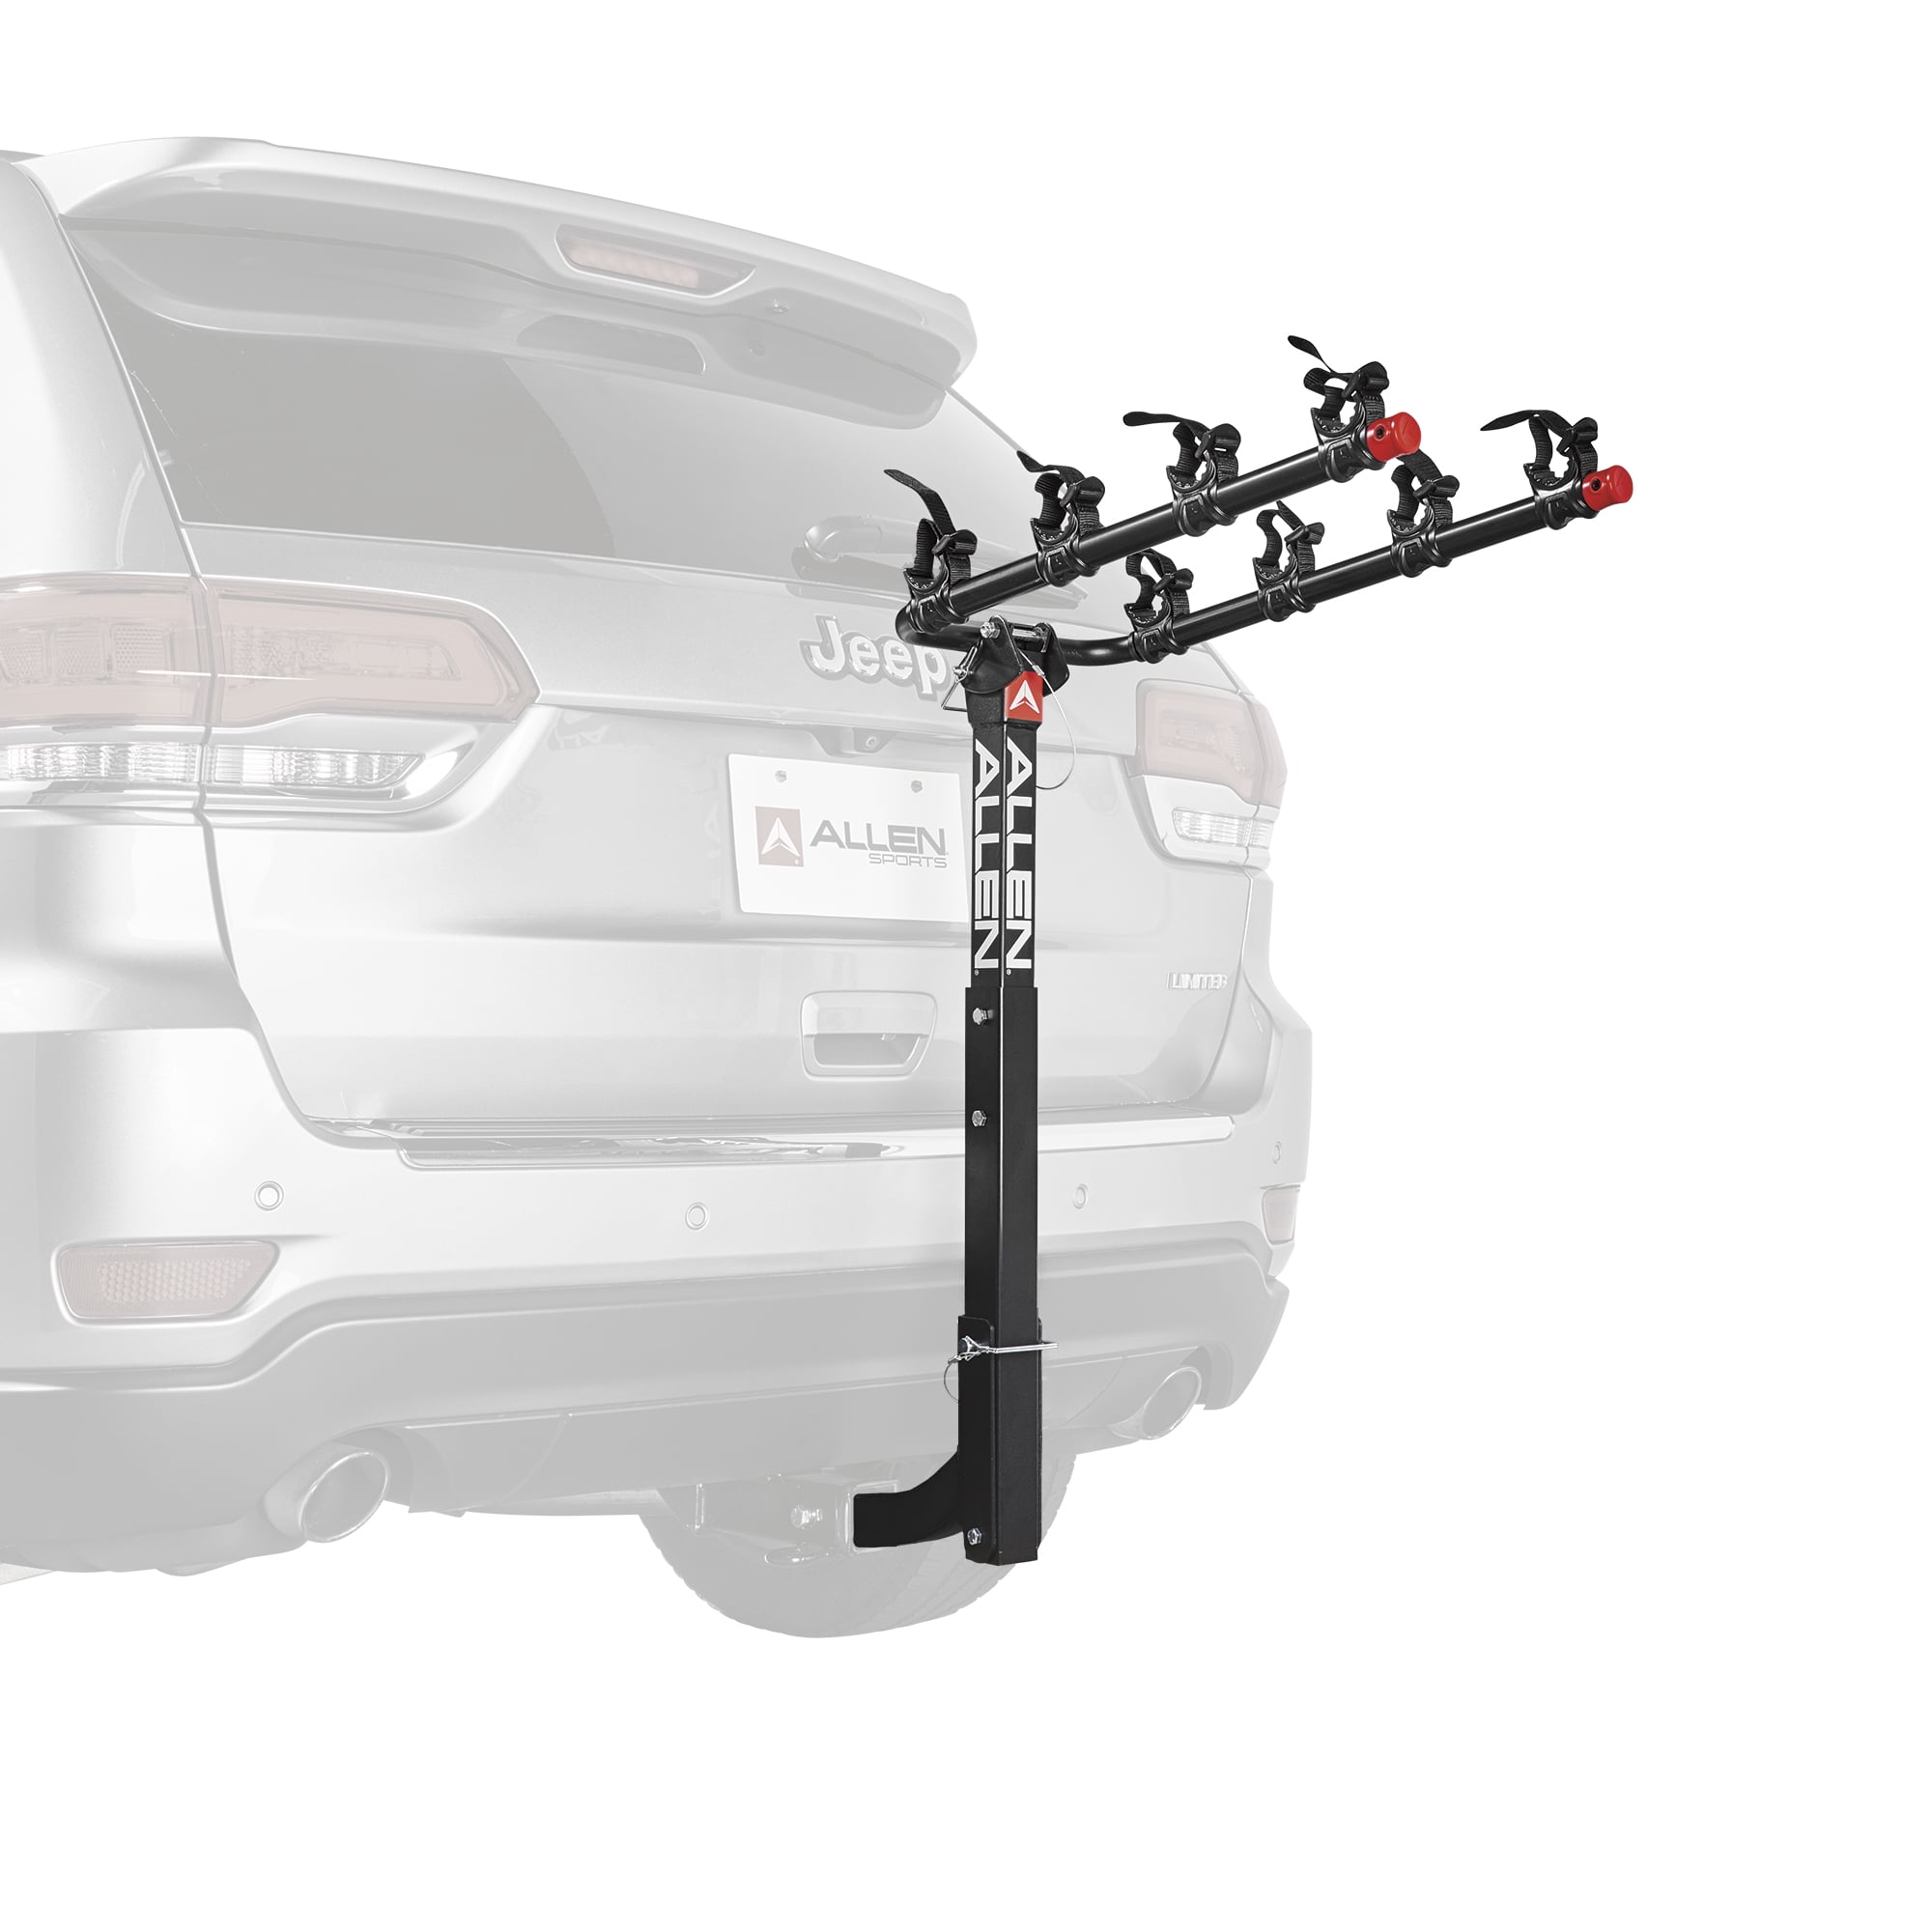 Details about   2 Bike Trunk Rack Rear Mount Two Bikes Carrier Car SUV Bicycle Sedans Sturdy BV 